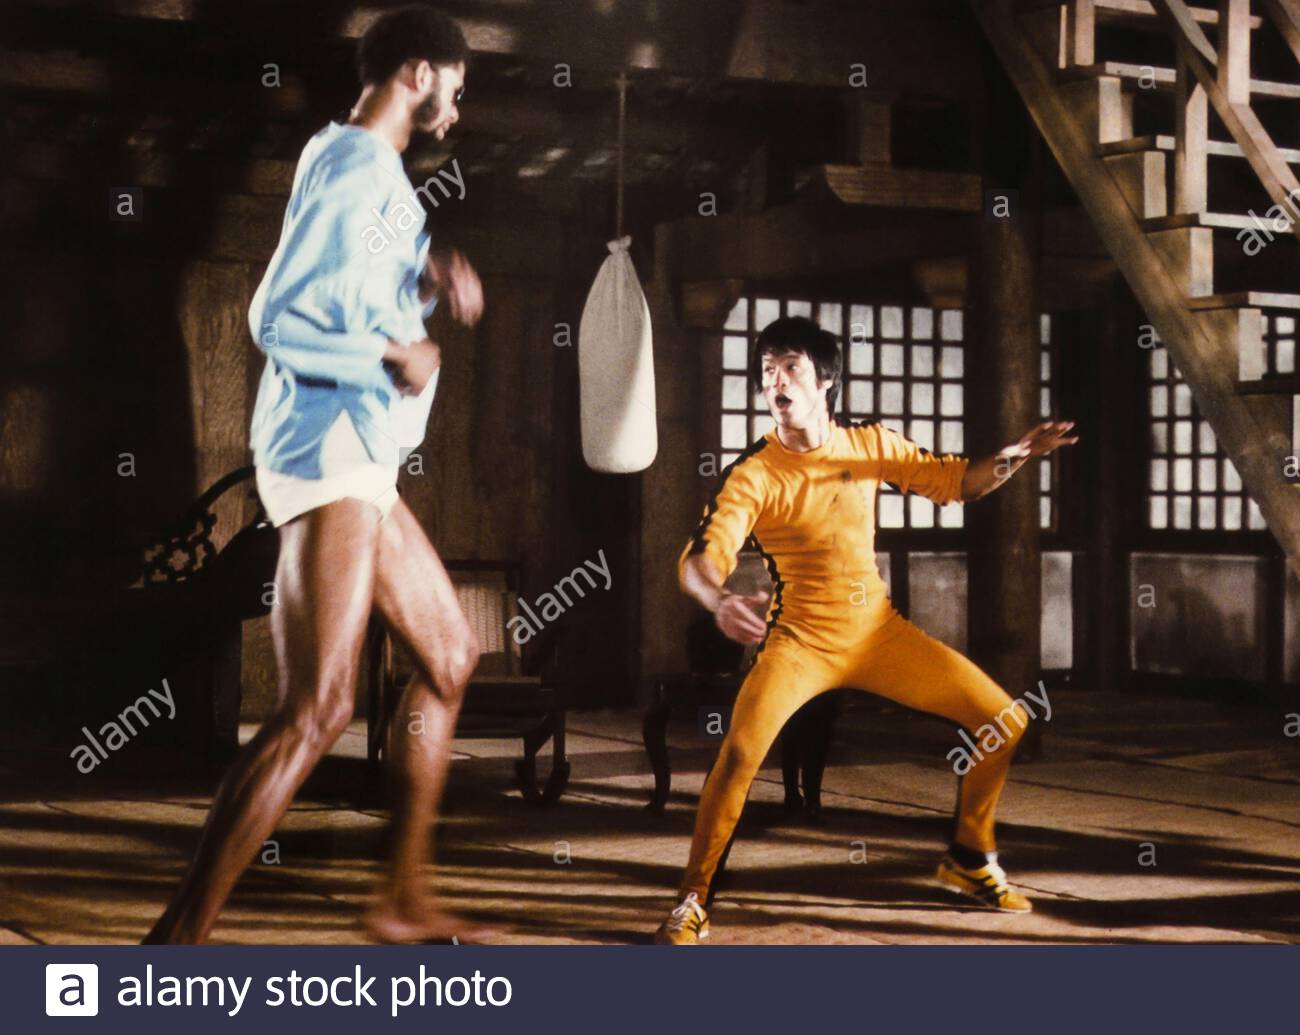 bruce lee game of death fight